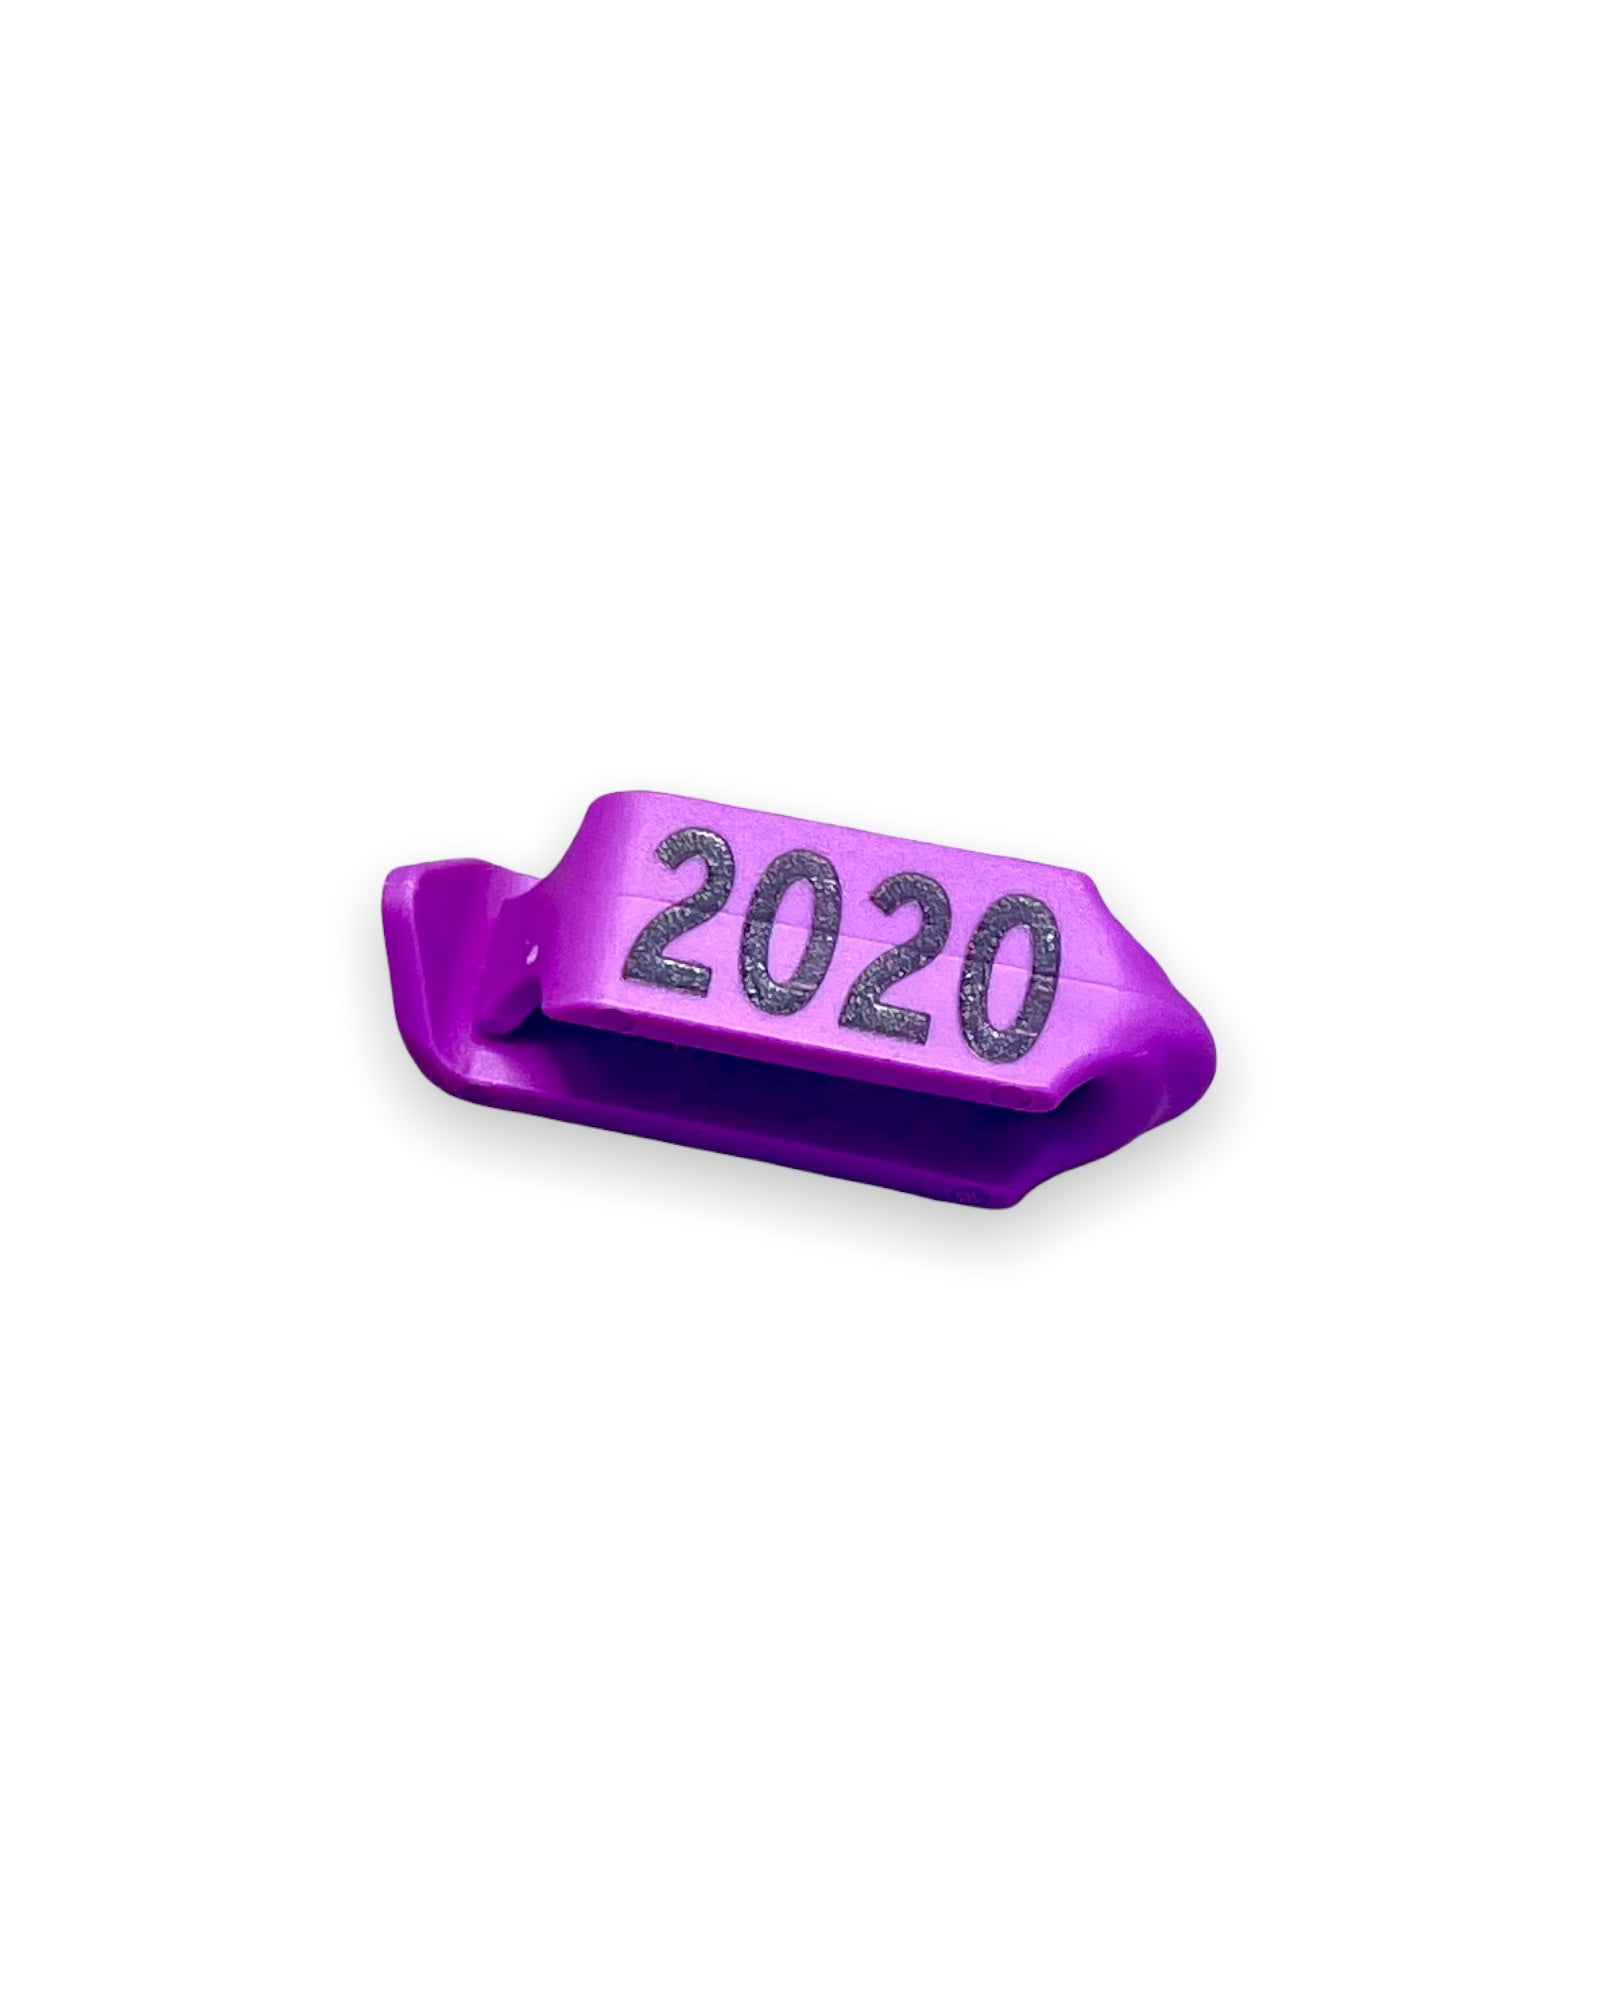 Sheep Tag | BK8 Outfitters | 2020 Purple